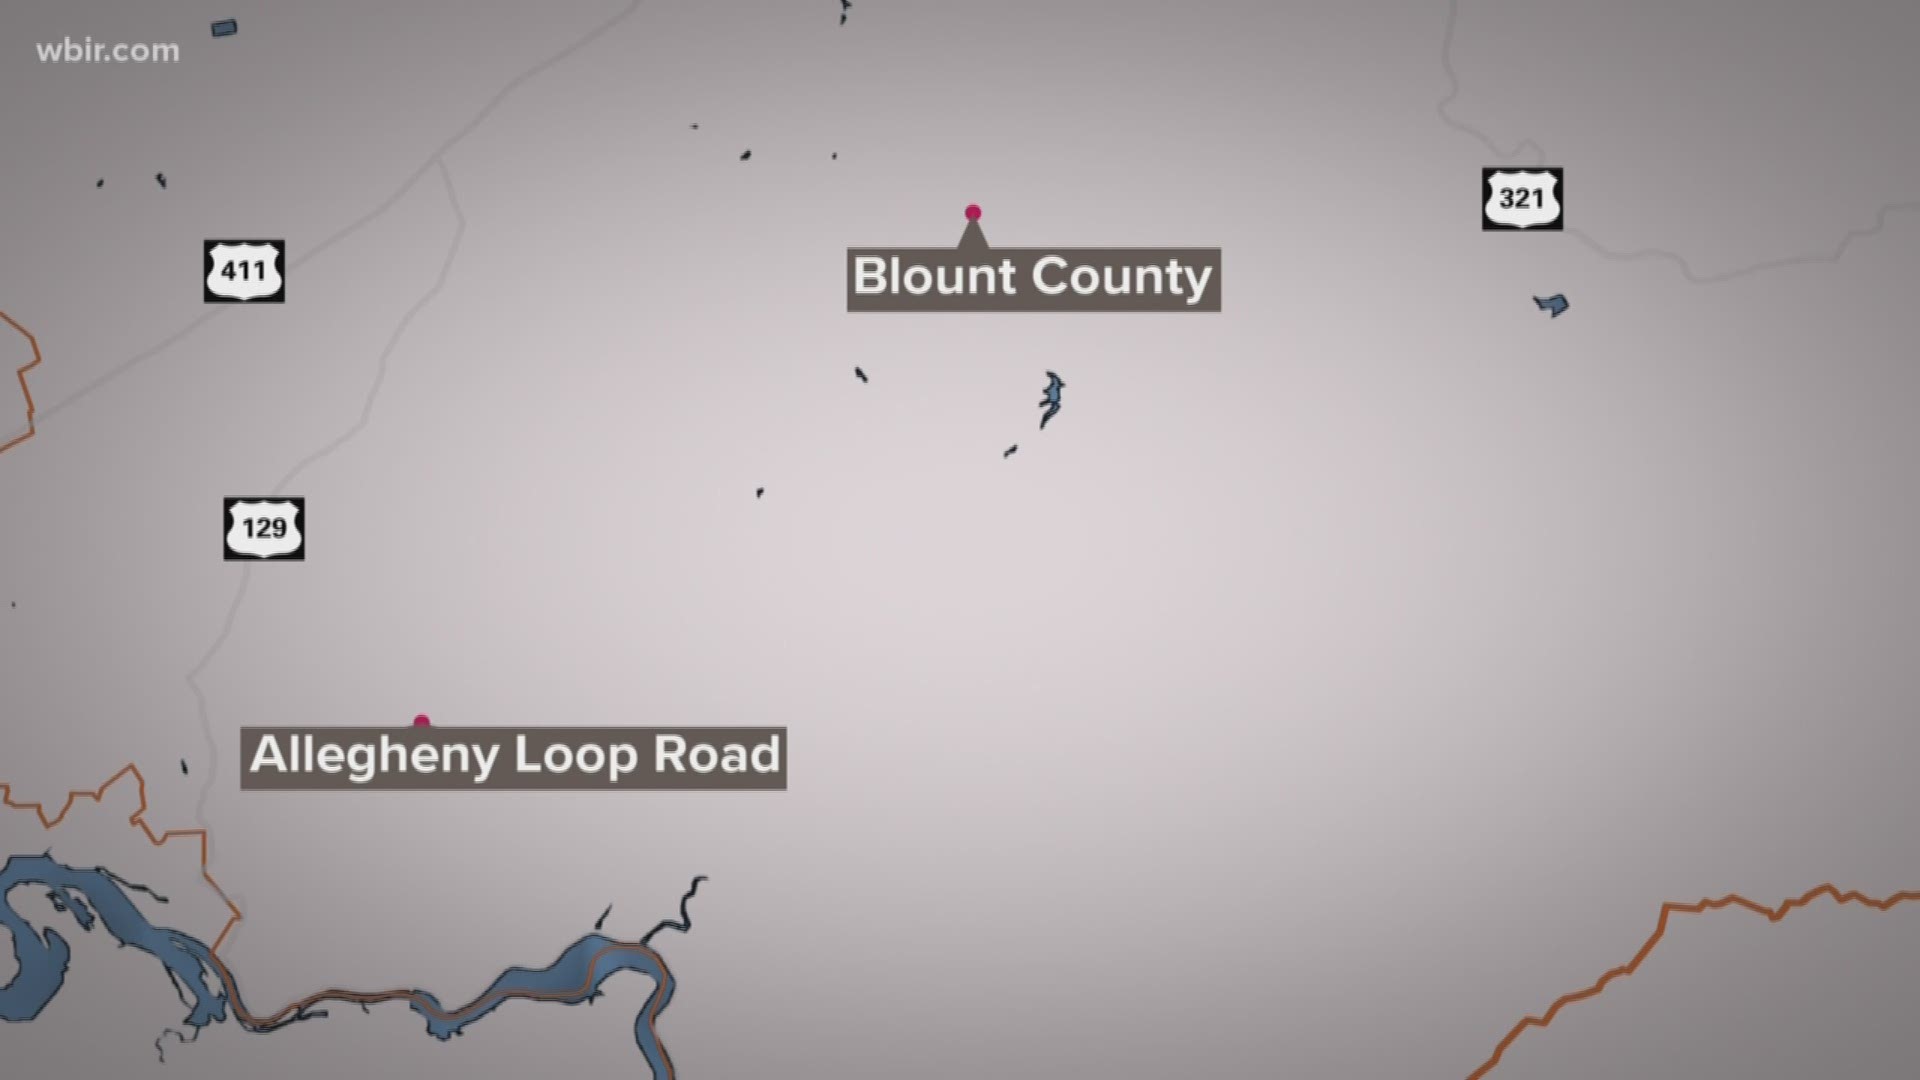 The Blount County Sheriff's Office says it happened near Allegheny Loop Road in Maryville around 3:30.